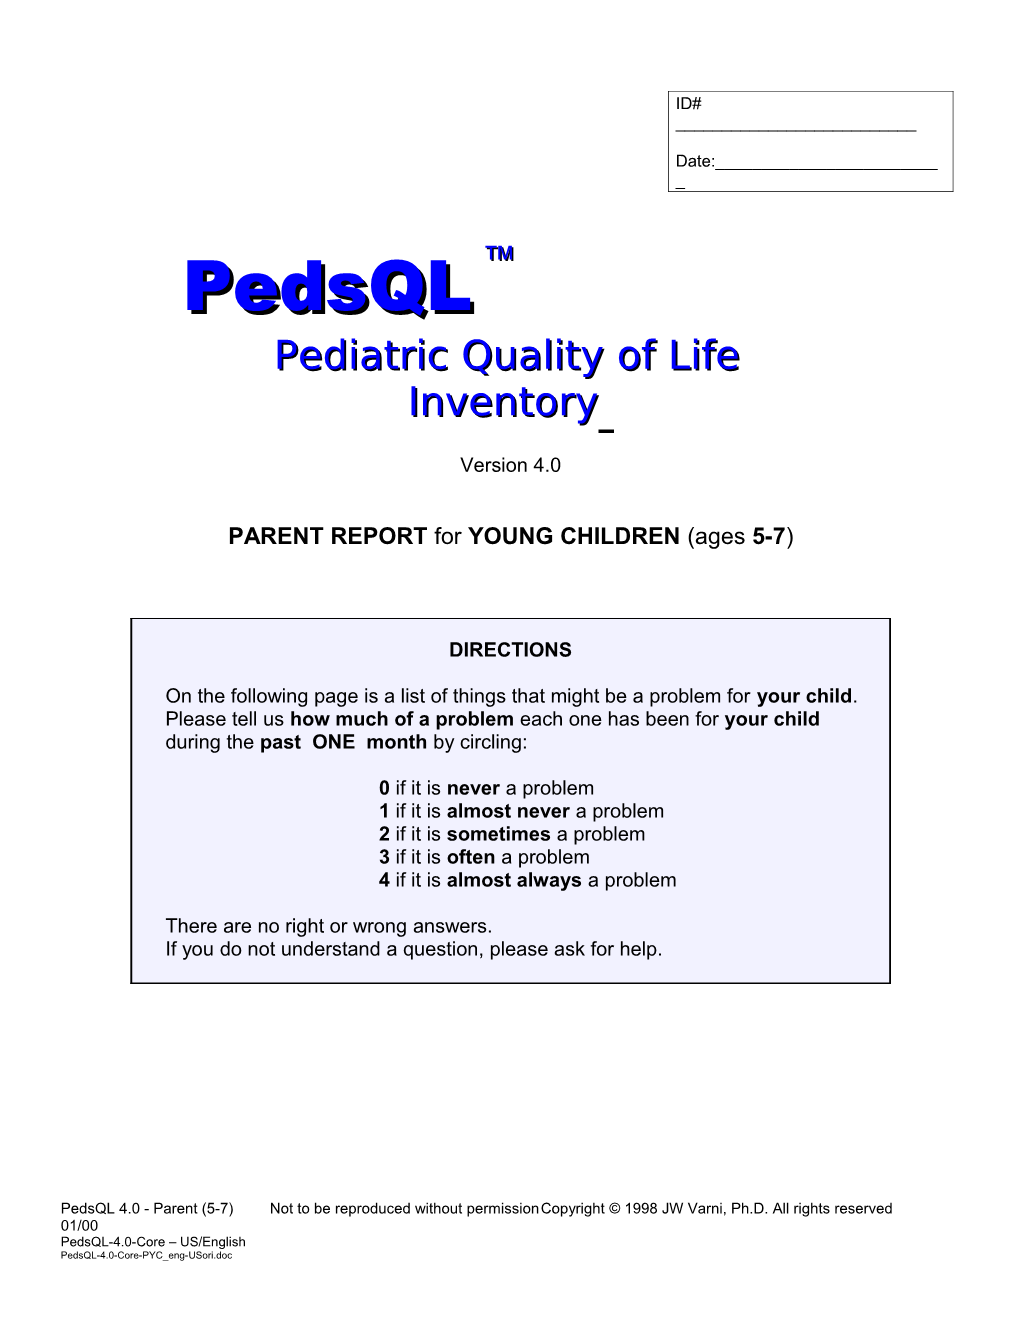 PARENT REPORT for YOUNG CHILDREN (Ages 5-7 )